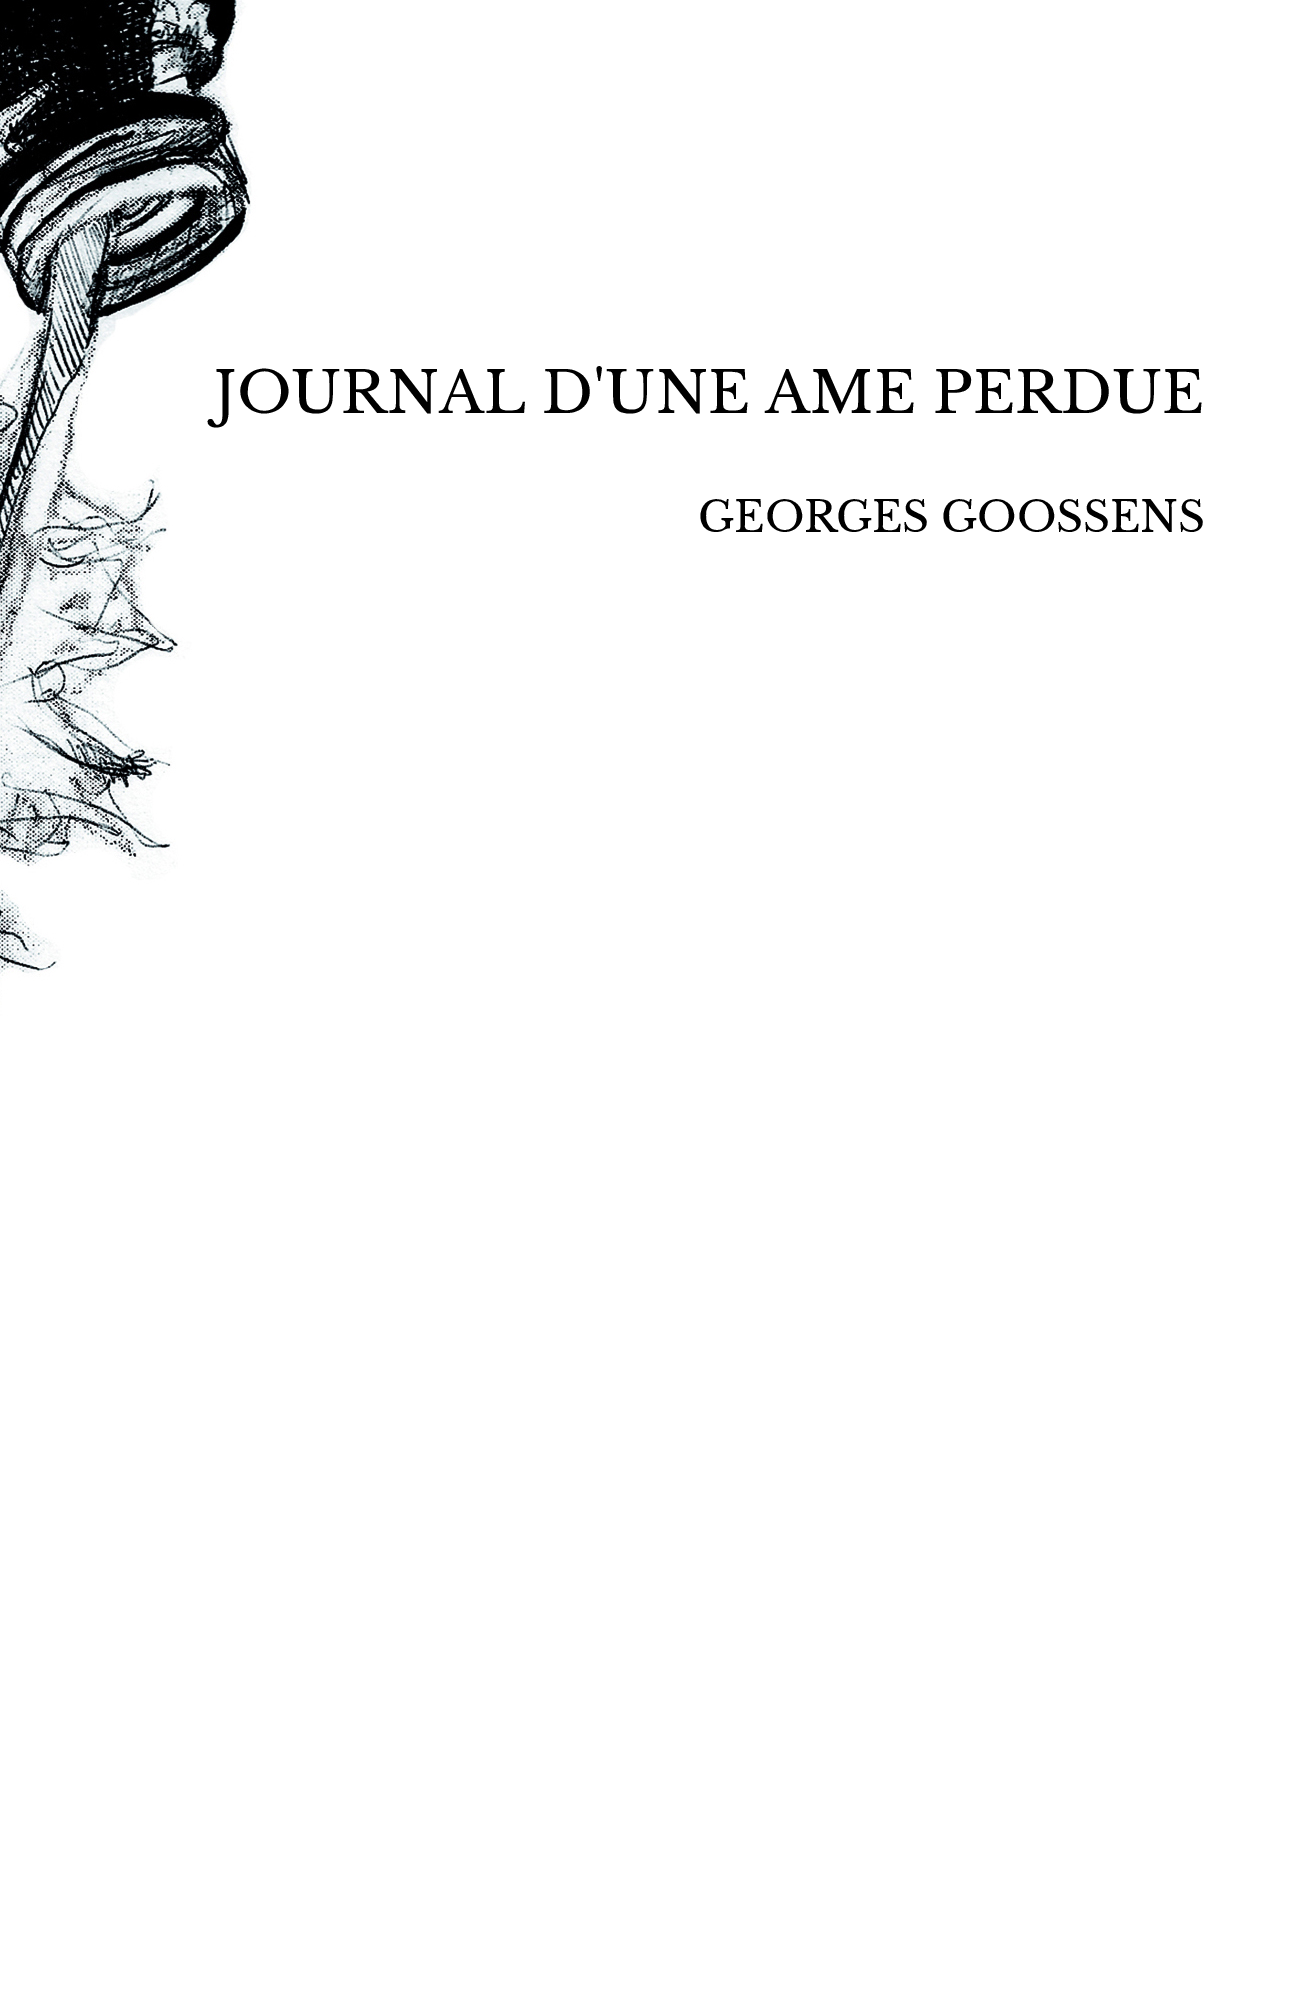 JOURNAL D'UNE AME PERDUE